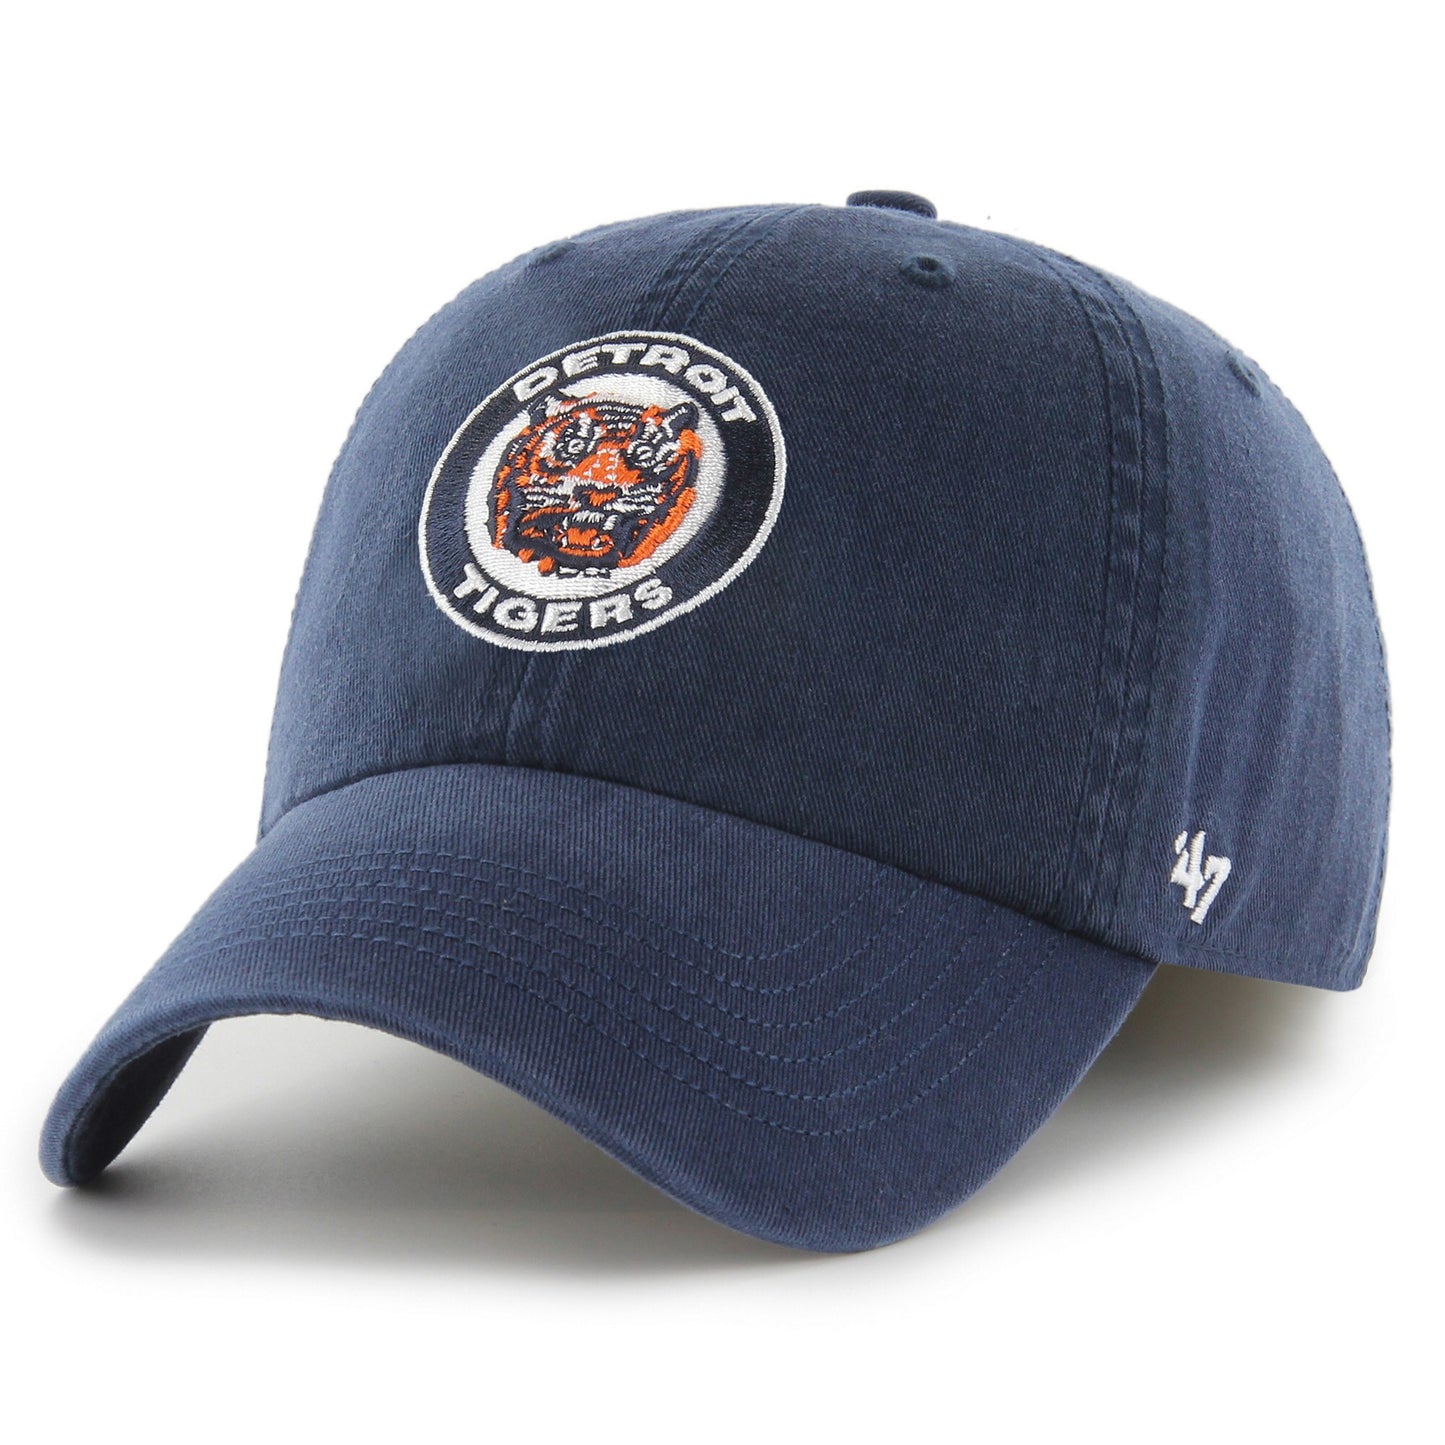 Detroit Tigers '47 Cooperstown Collection Franchise Fitted Hat - Navy